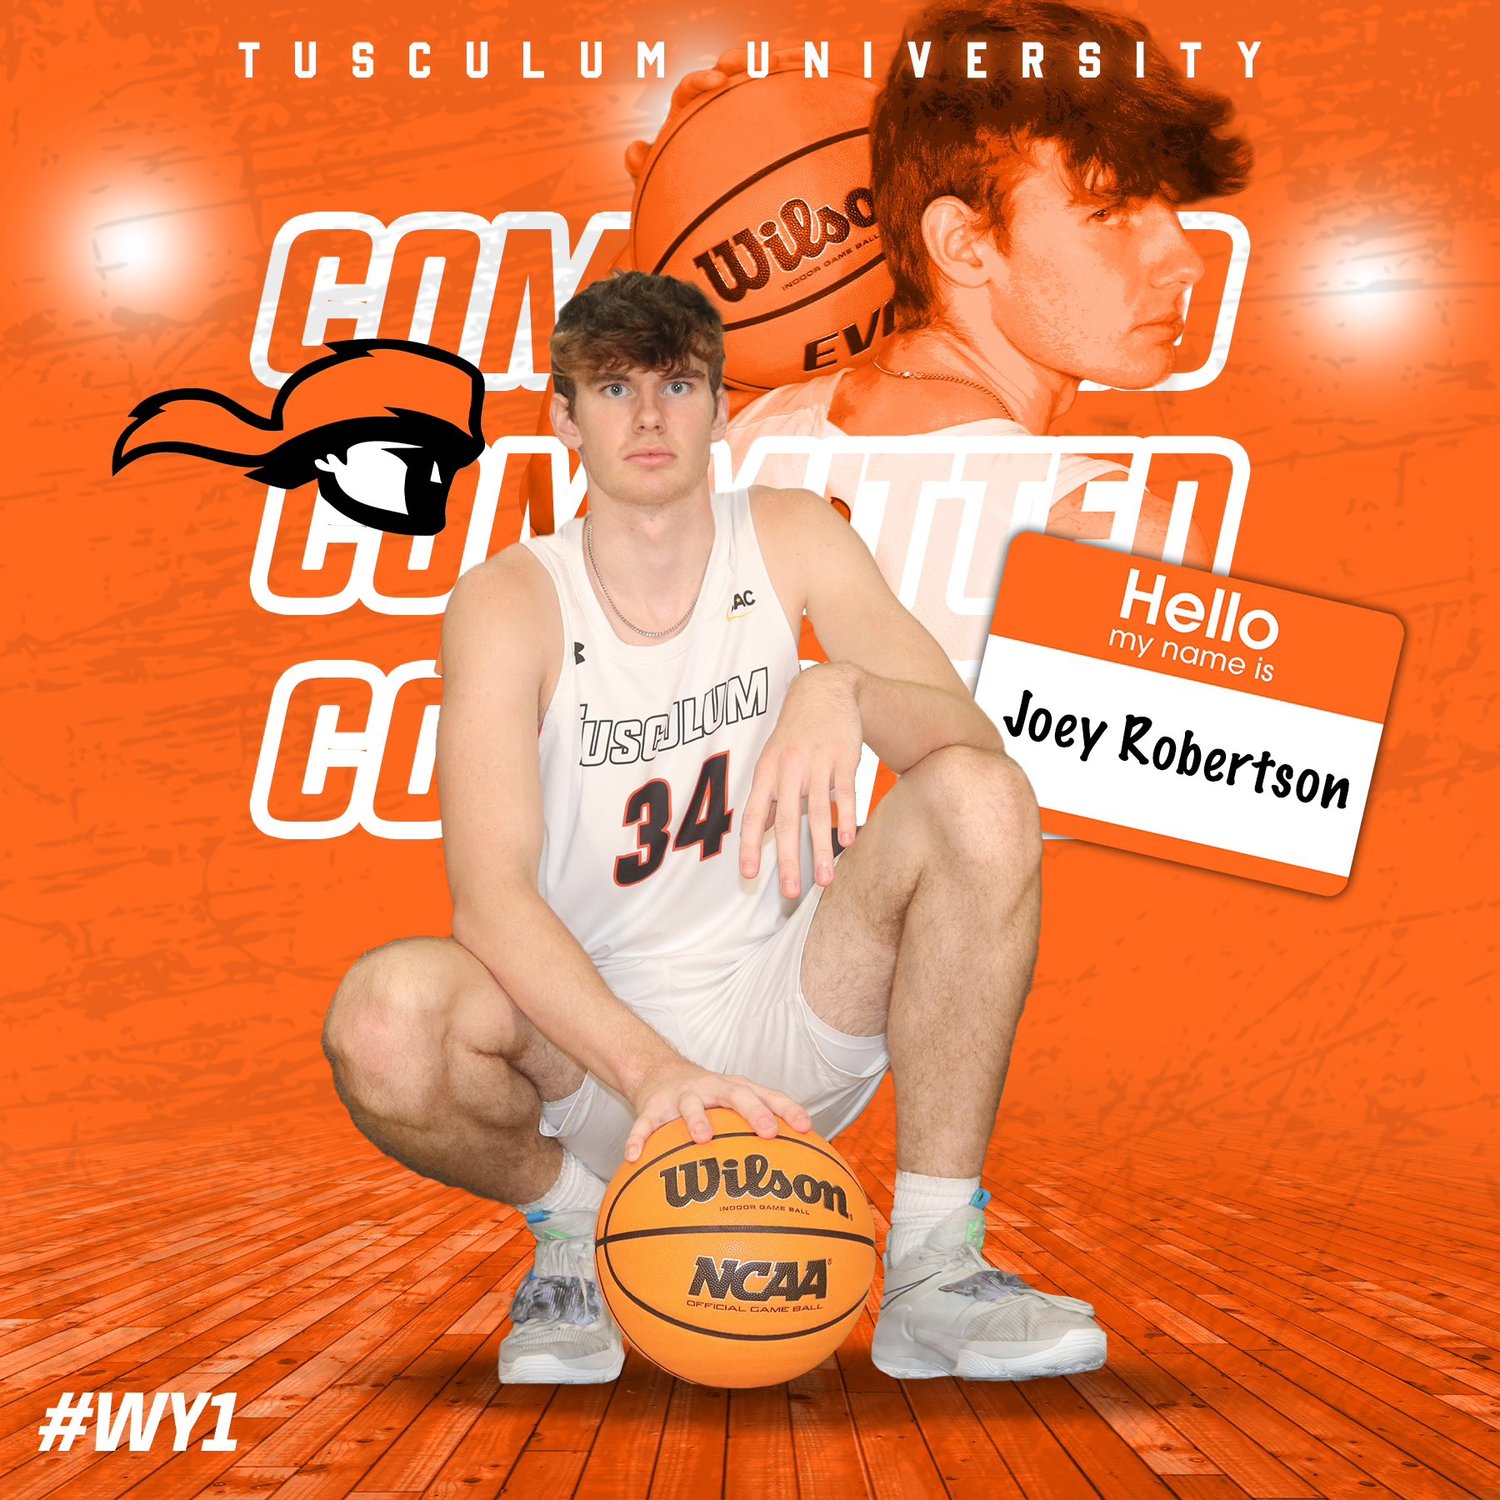 Orange Beach senior Joey Robertson announced his verbal commitment to the University of Tusculum Pioneers’ basketball program Sept. 10. The Makos’ first all-state boys’ basketball player previously earned offers from the University of Montevallo and Texas A&M University-Texarkana.